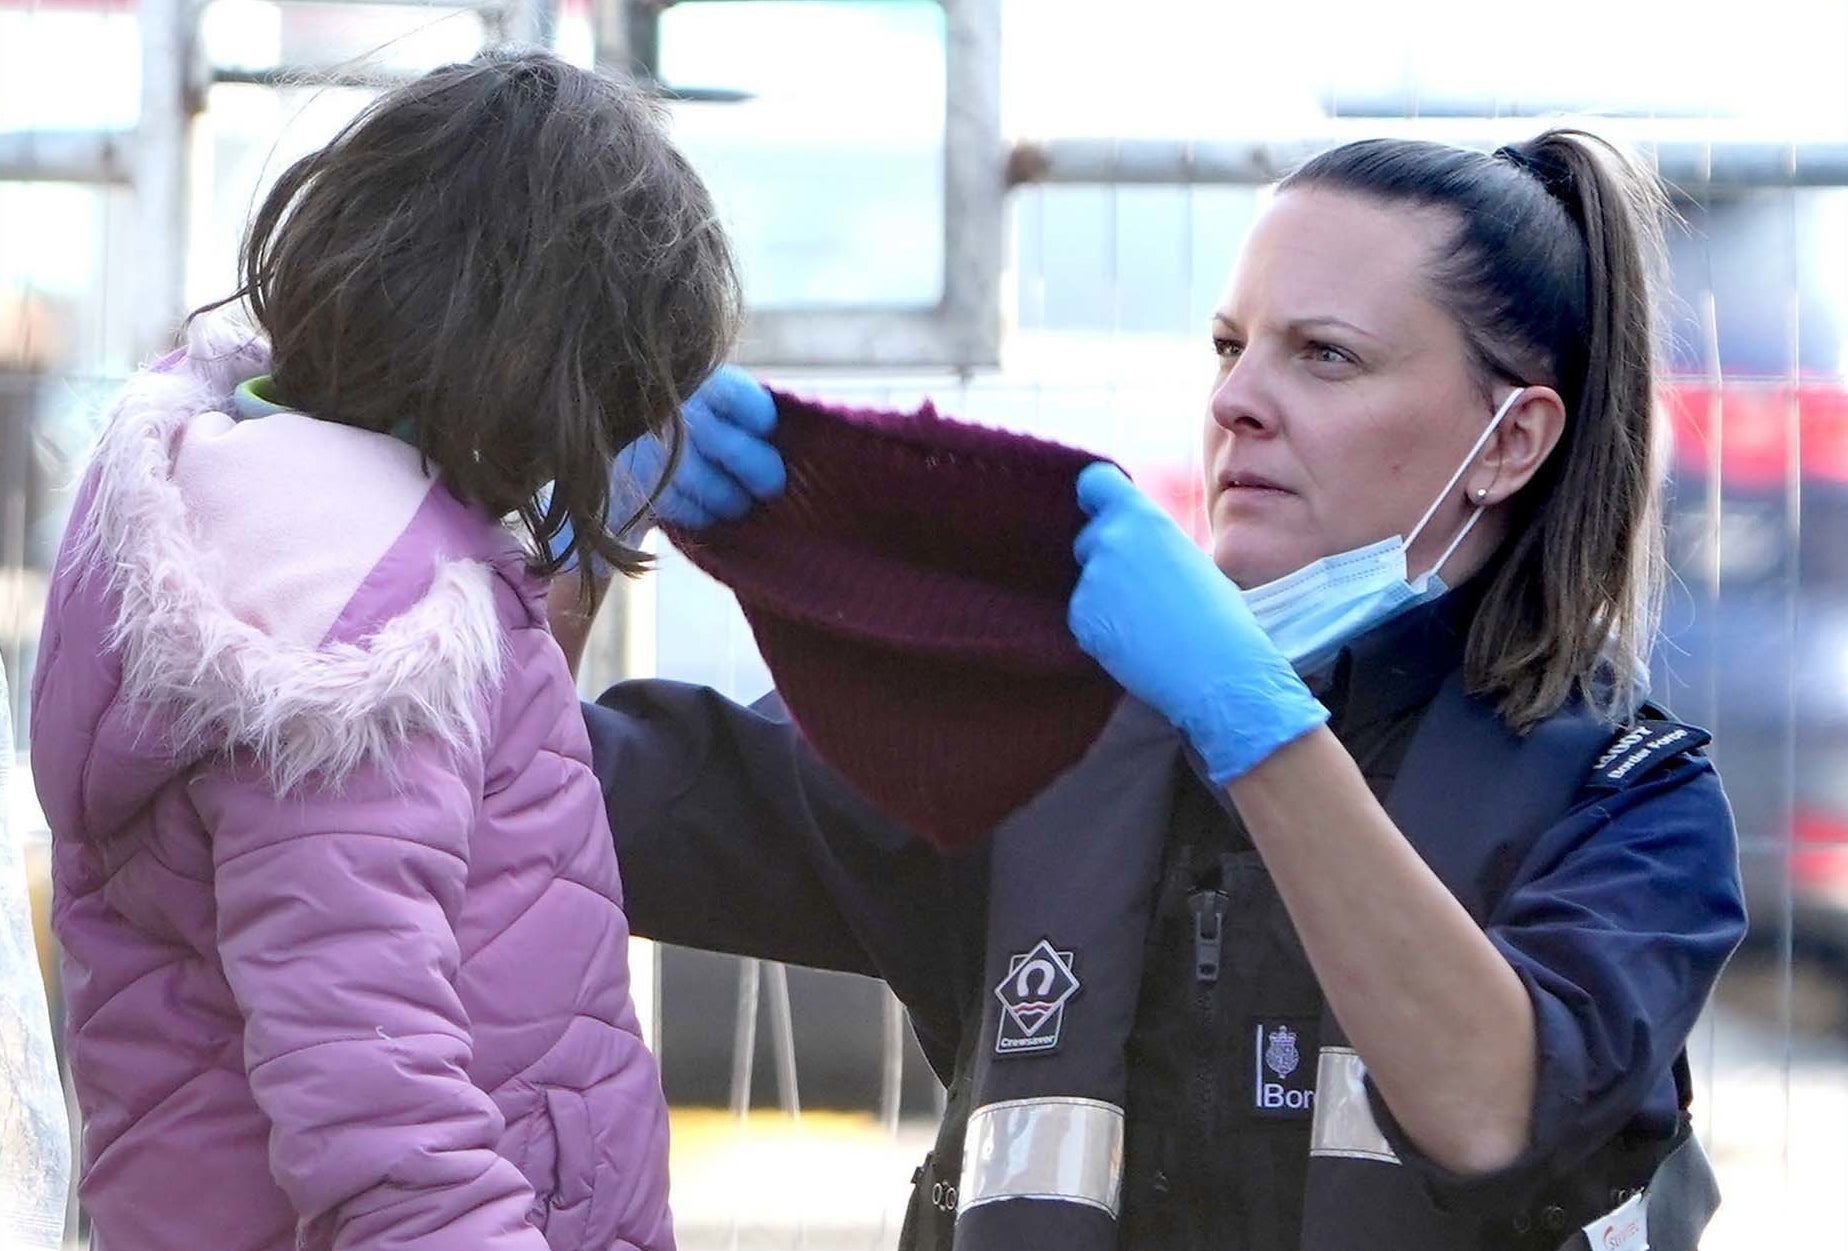 Border Force officer puts a hat on a girl who arrived in Kent with other migrants on a small boat